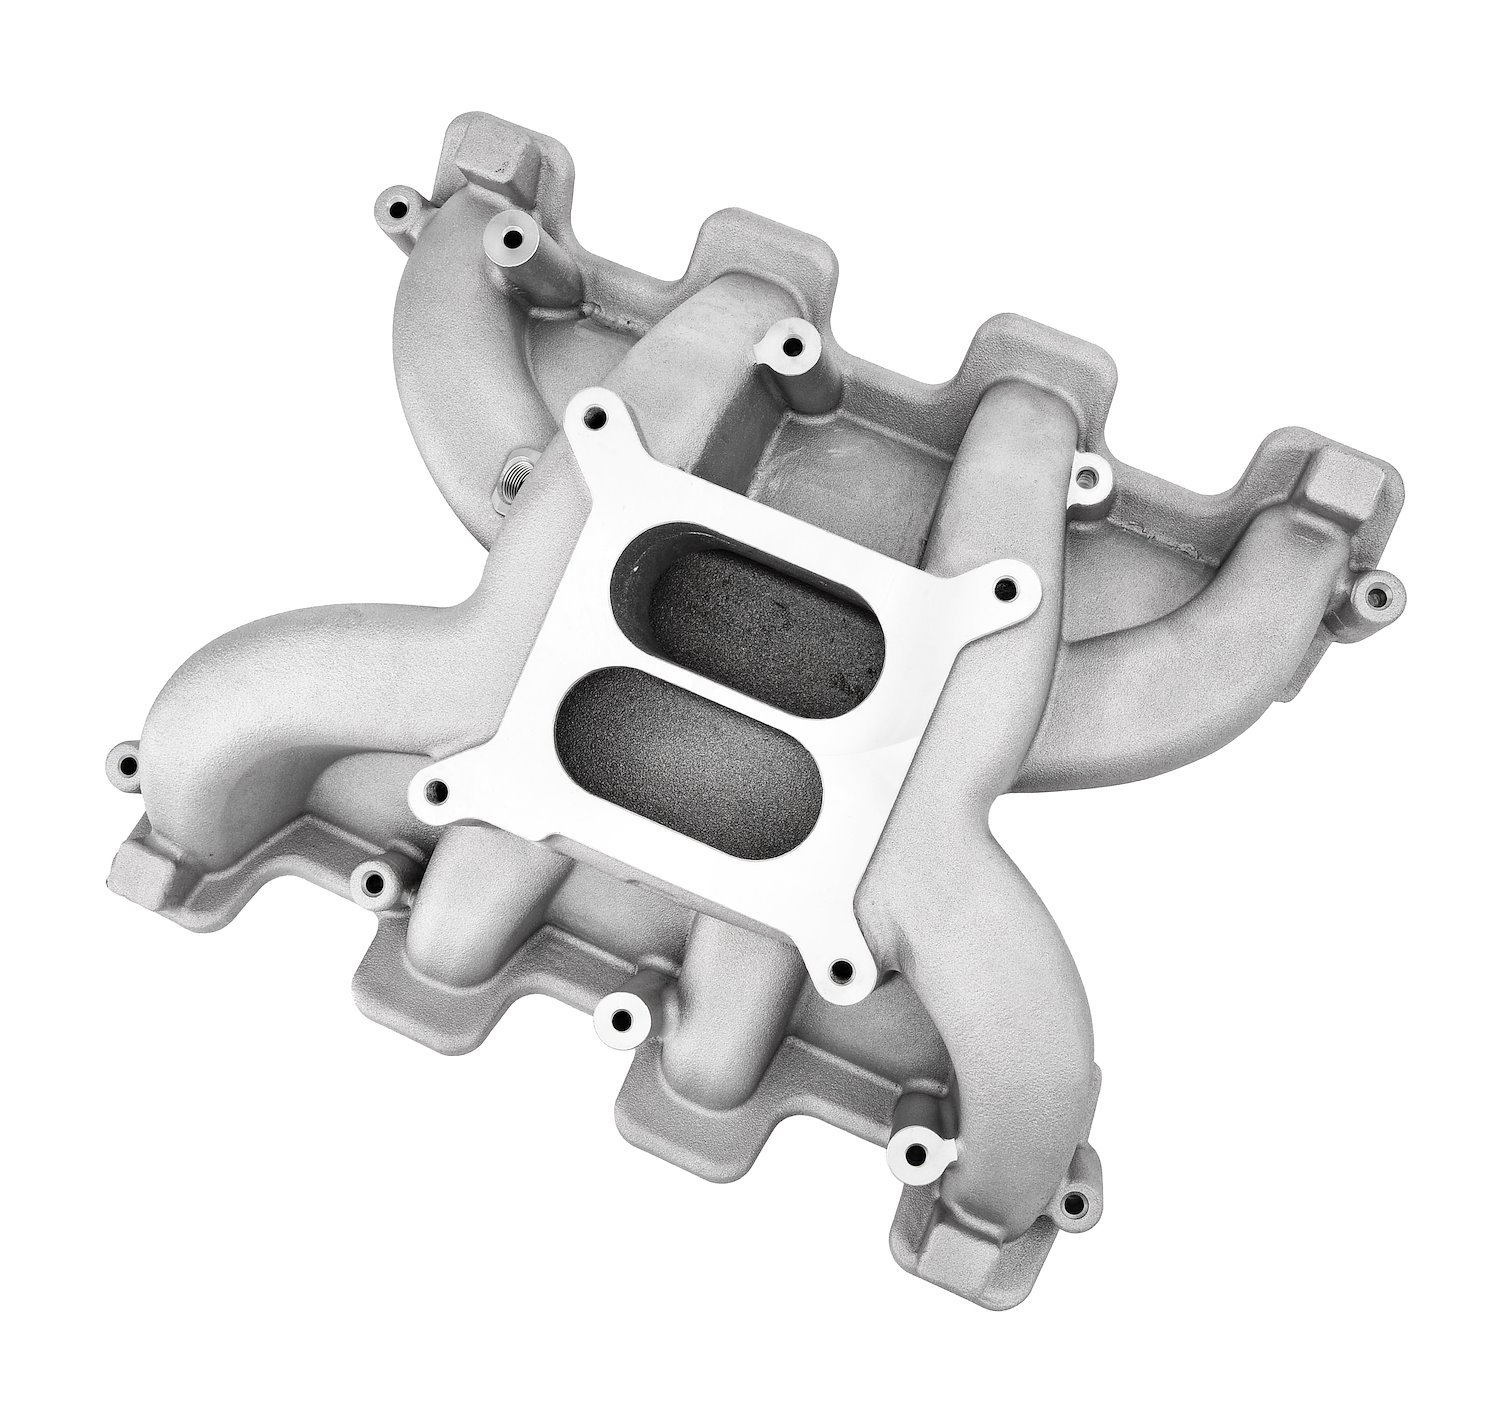 Mid-Rise Dual Plane Intake Manifold for GM LS1/LS2/LS6 with Cathedral Port Heads [Satin]